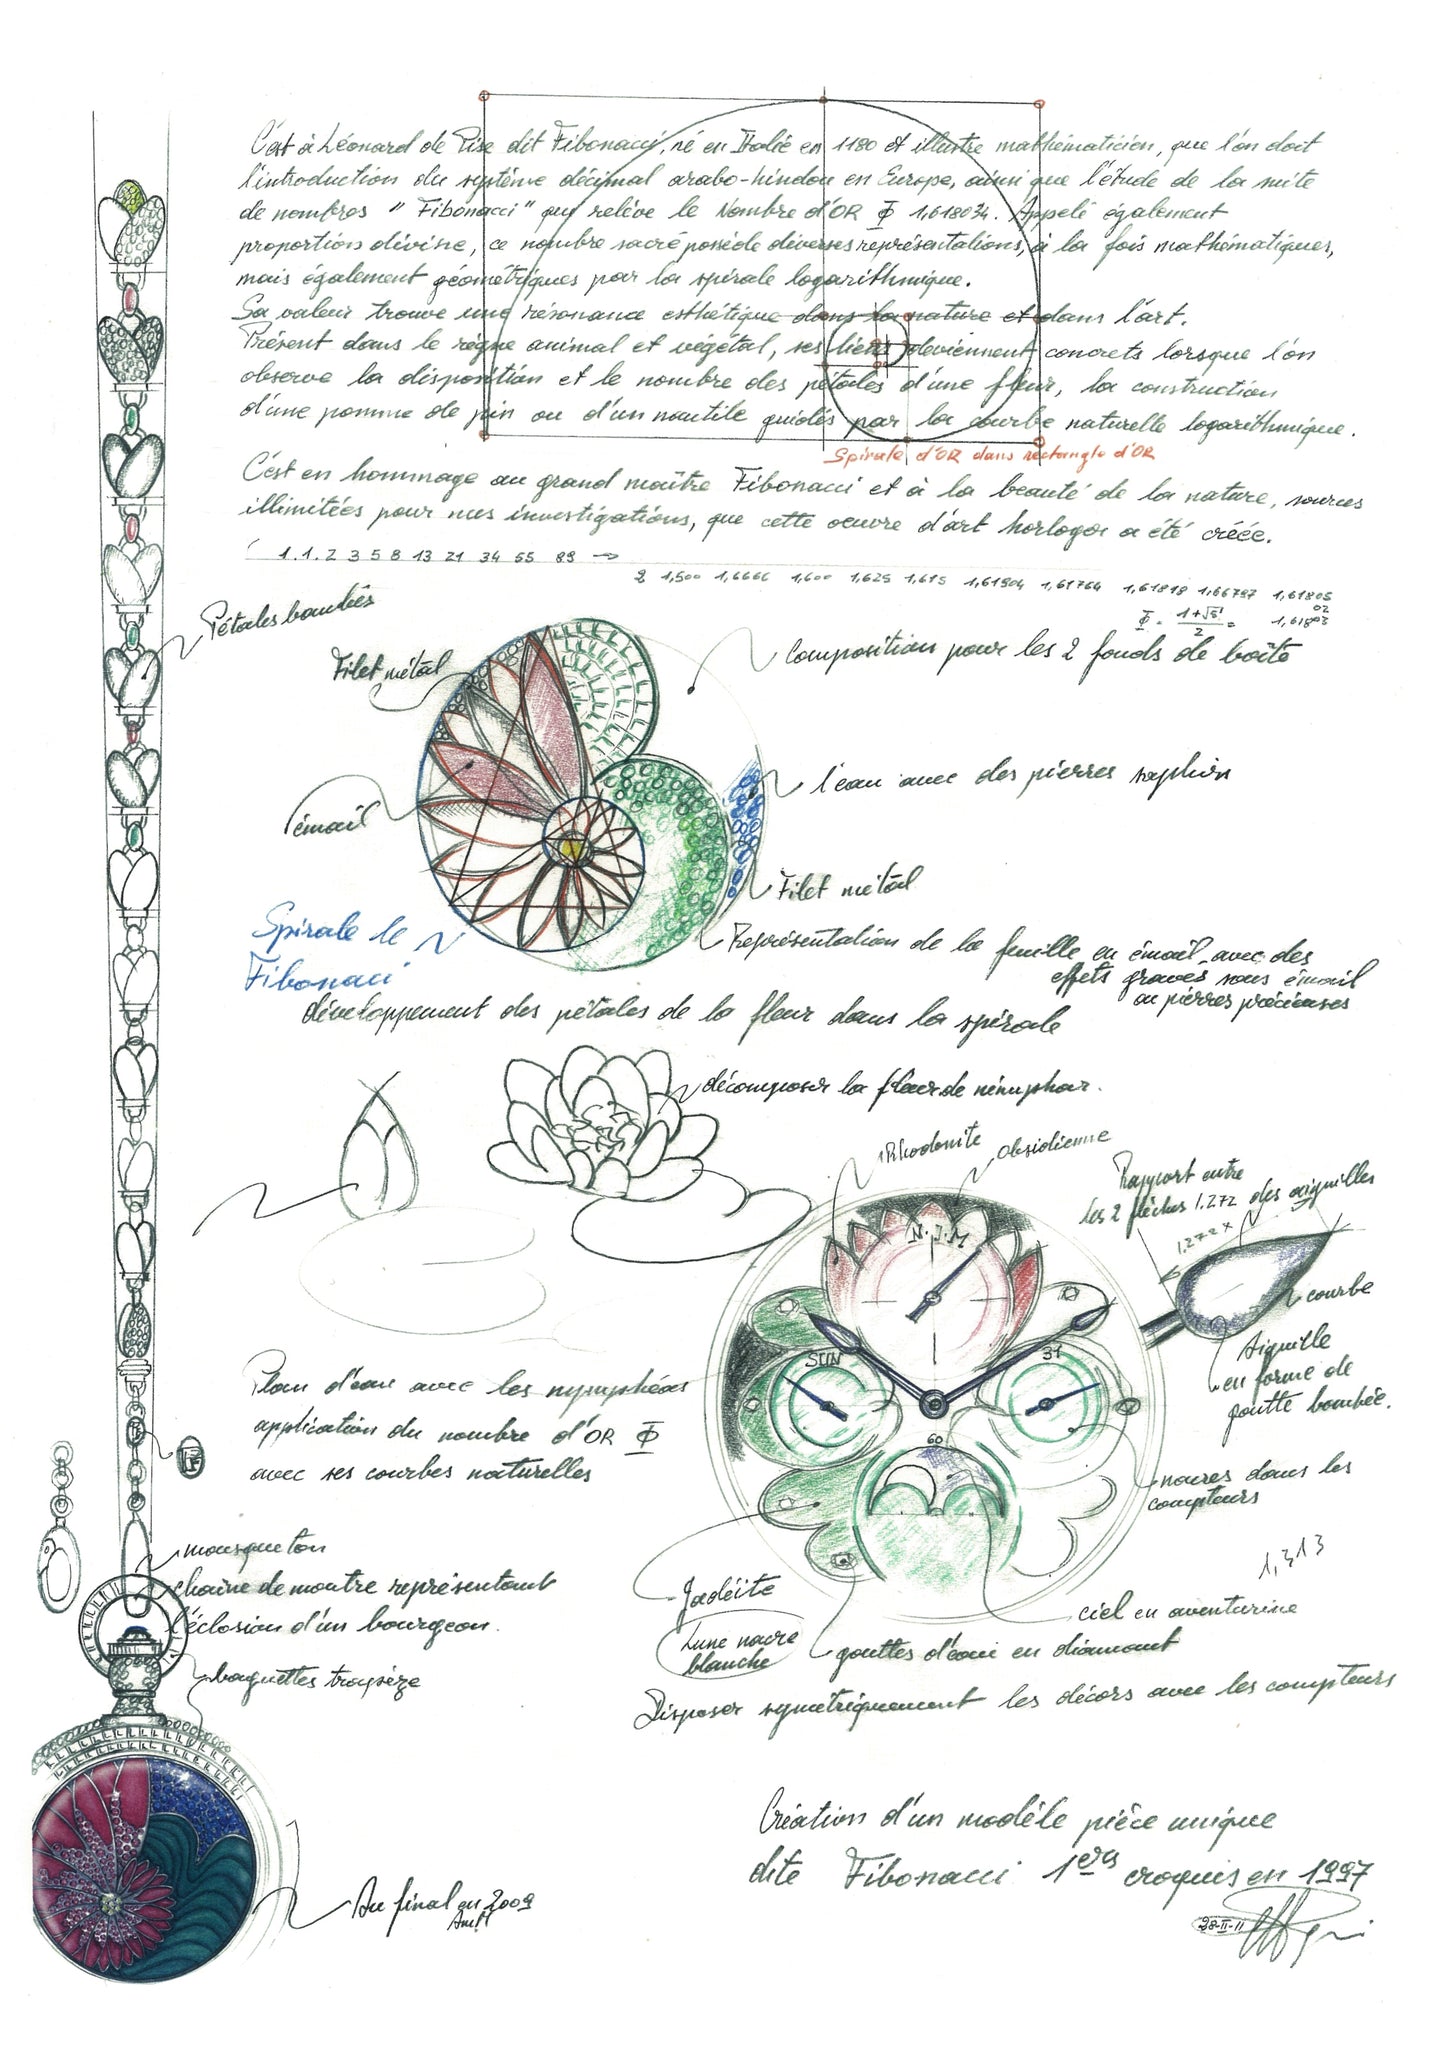 Sketches and notes for a pocketwatch that demonstrate the influence of the Fibonacci sequence on Parmigiani’s work, courtesy of Parmigiani Fleurier.